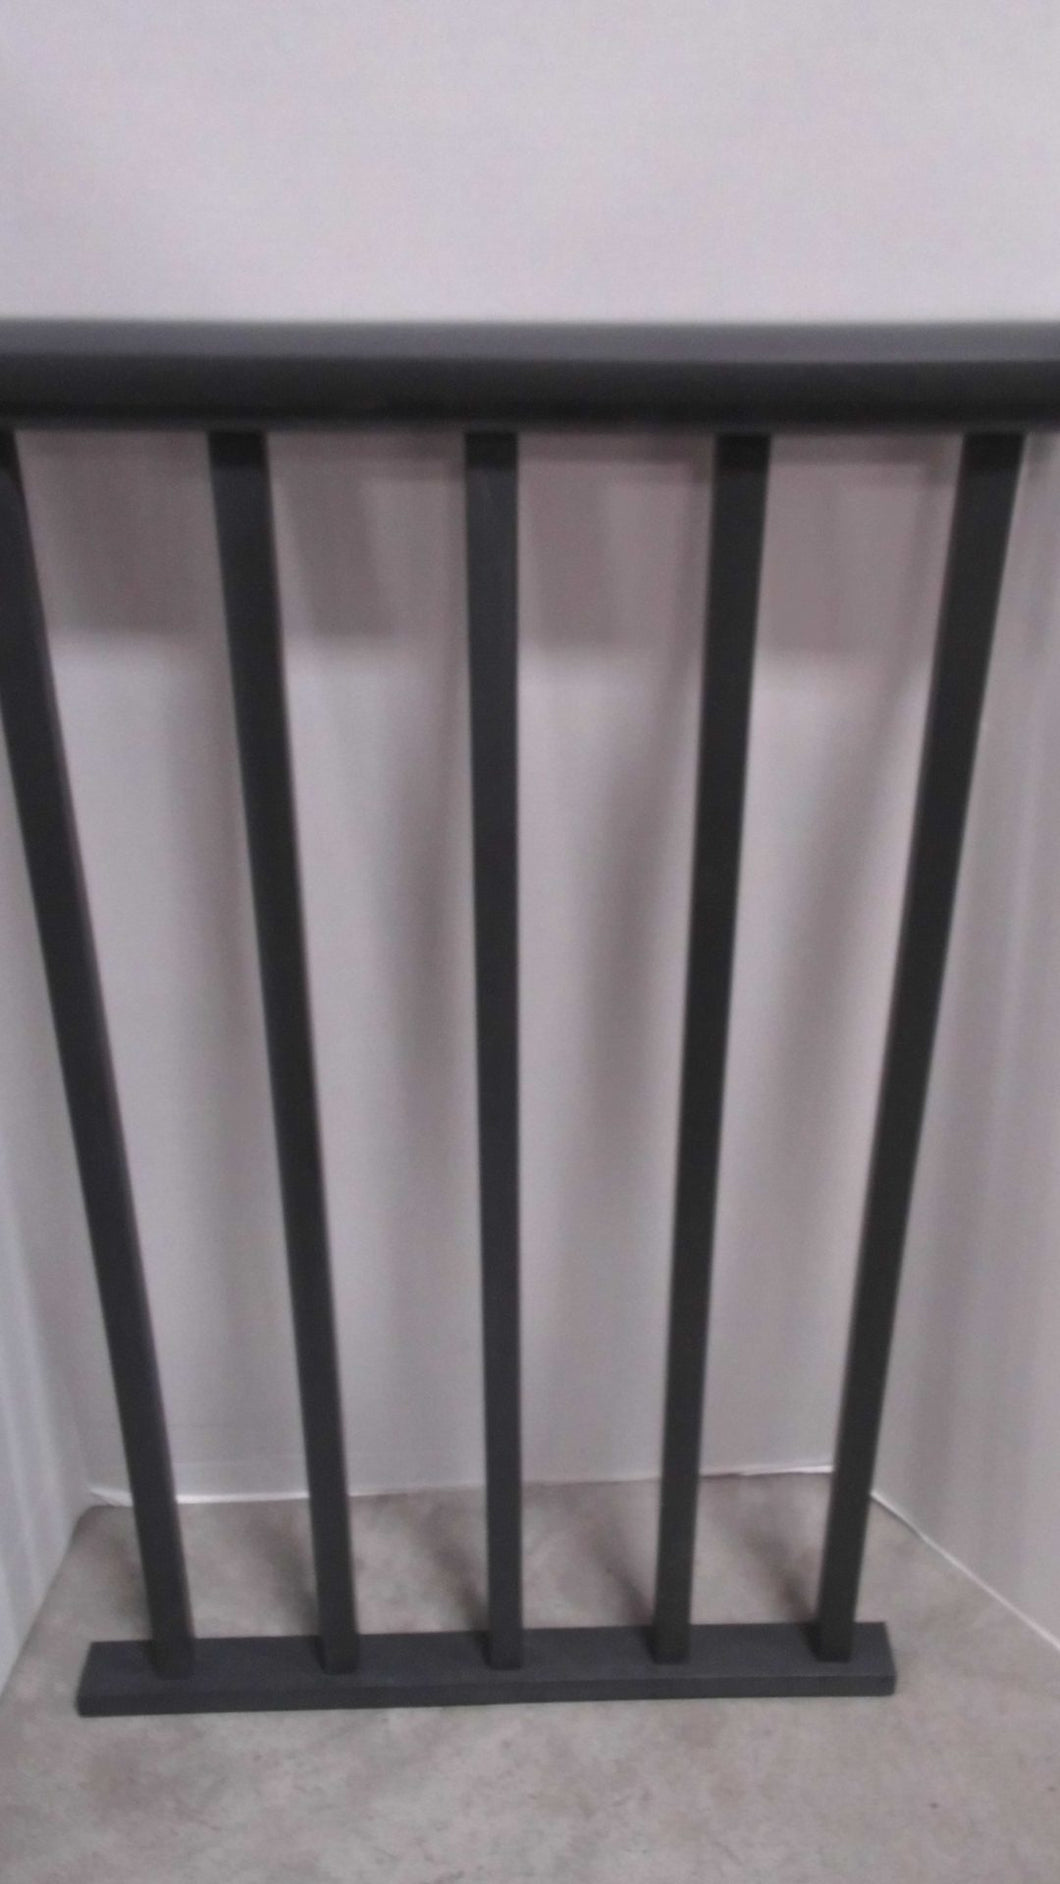 Metal Railing 20 foot sections $150.00 per section